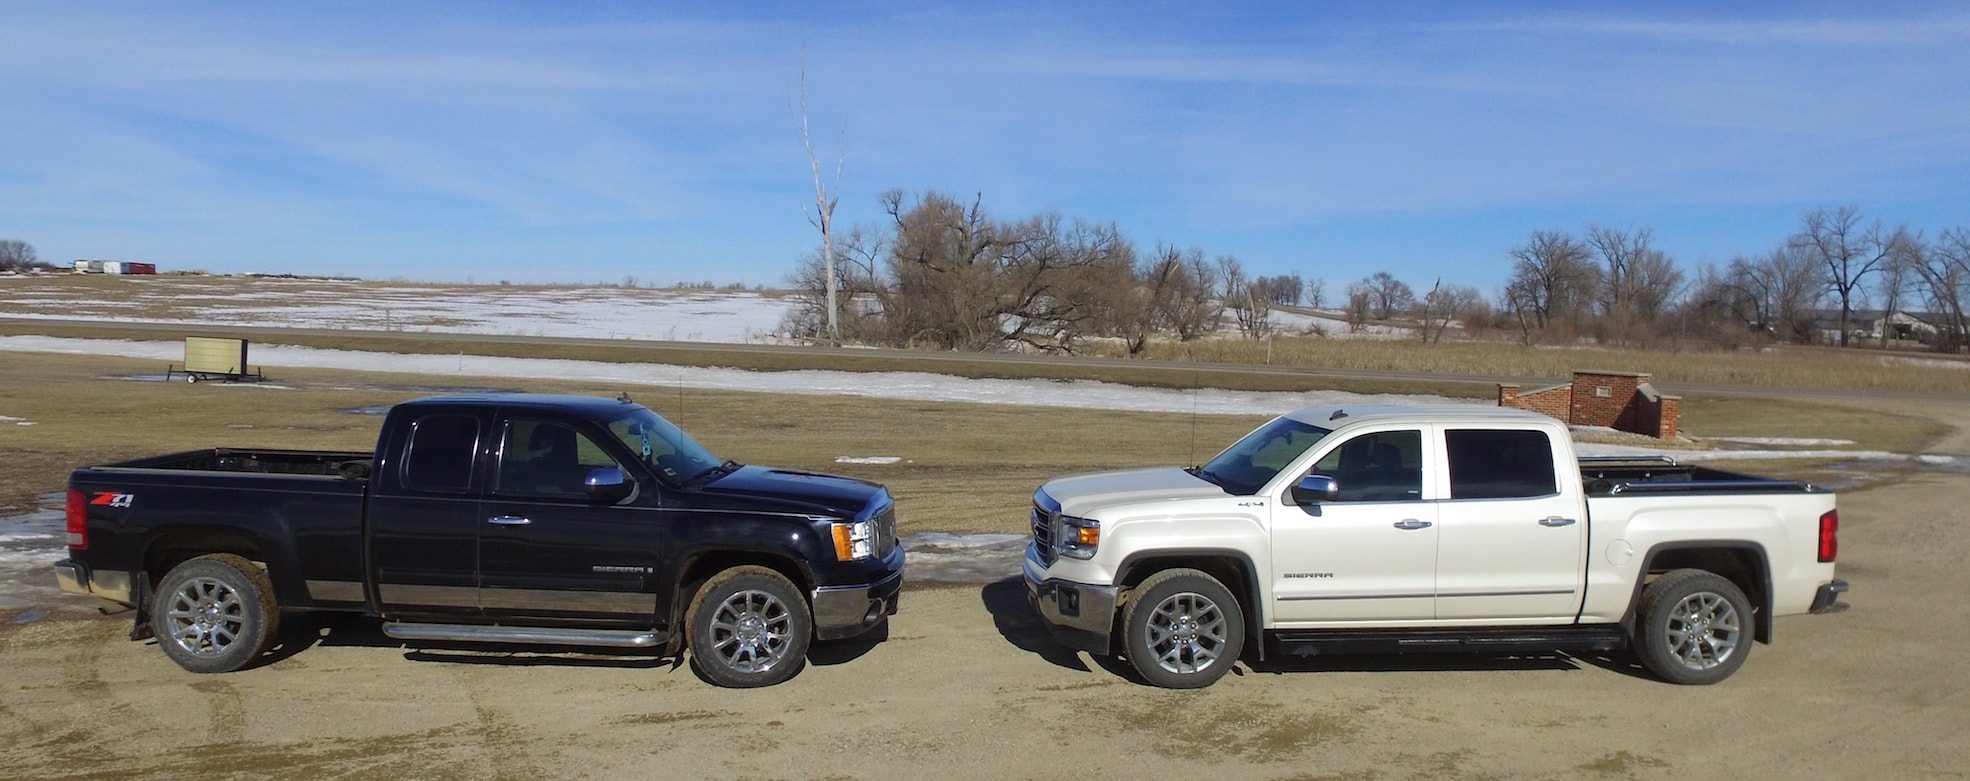 Both Pickups Facing Each Other